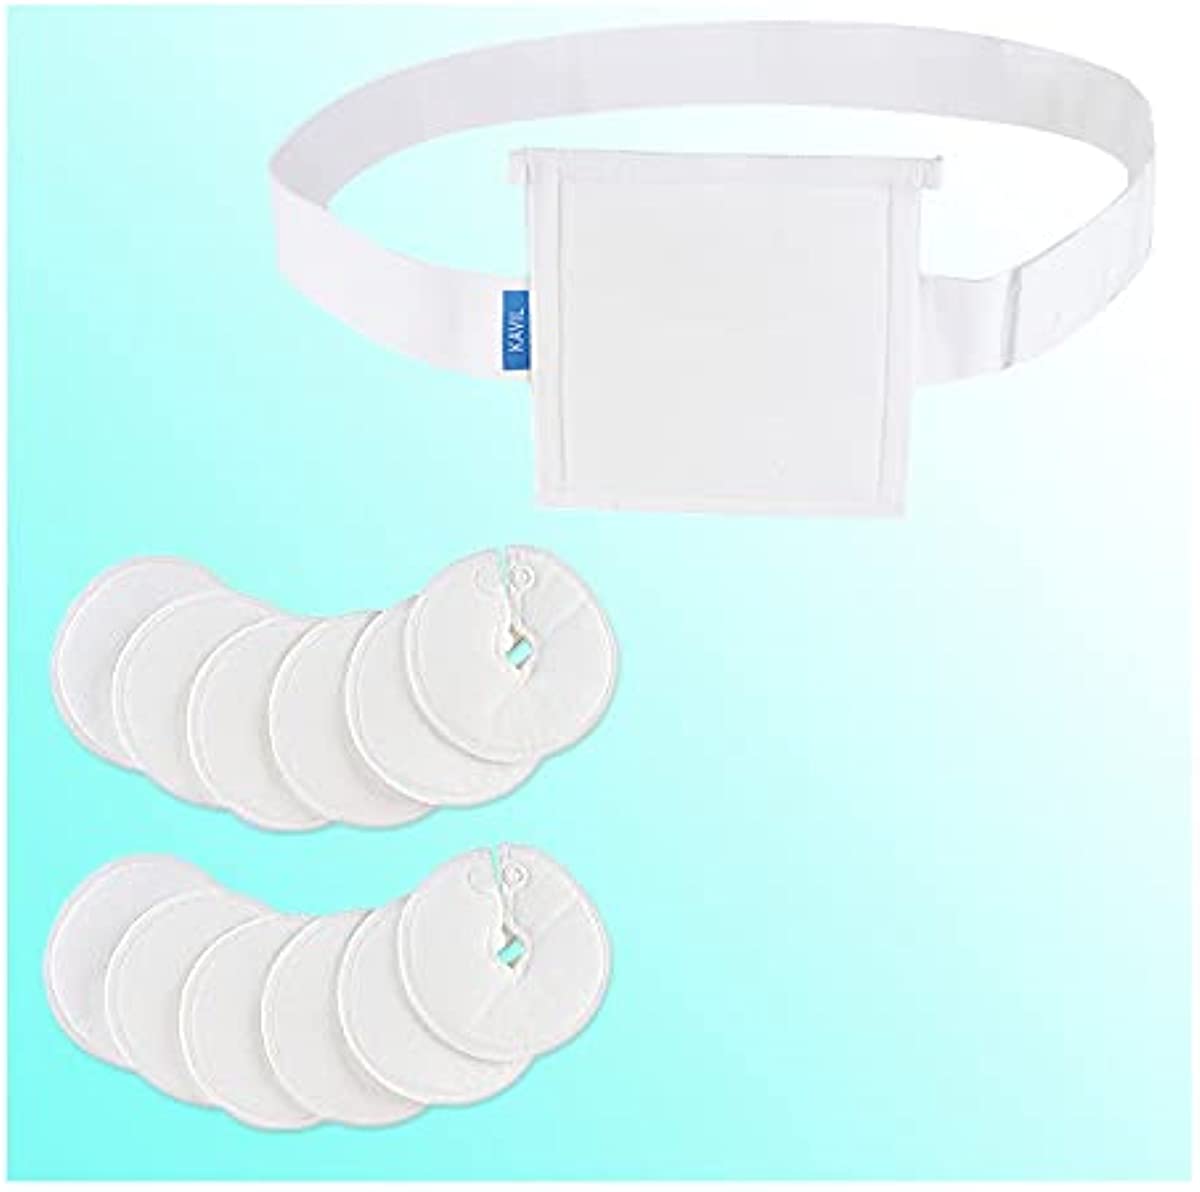 Gtube Button Covers (12 Pcs) and Feeding Tube Belt (1 Pcs) Supplies Peritoneal Dialysis Accessories G Tube Pads Pd Peg Tube Holder Ostomy Accessories